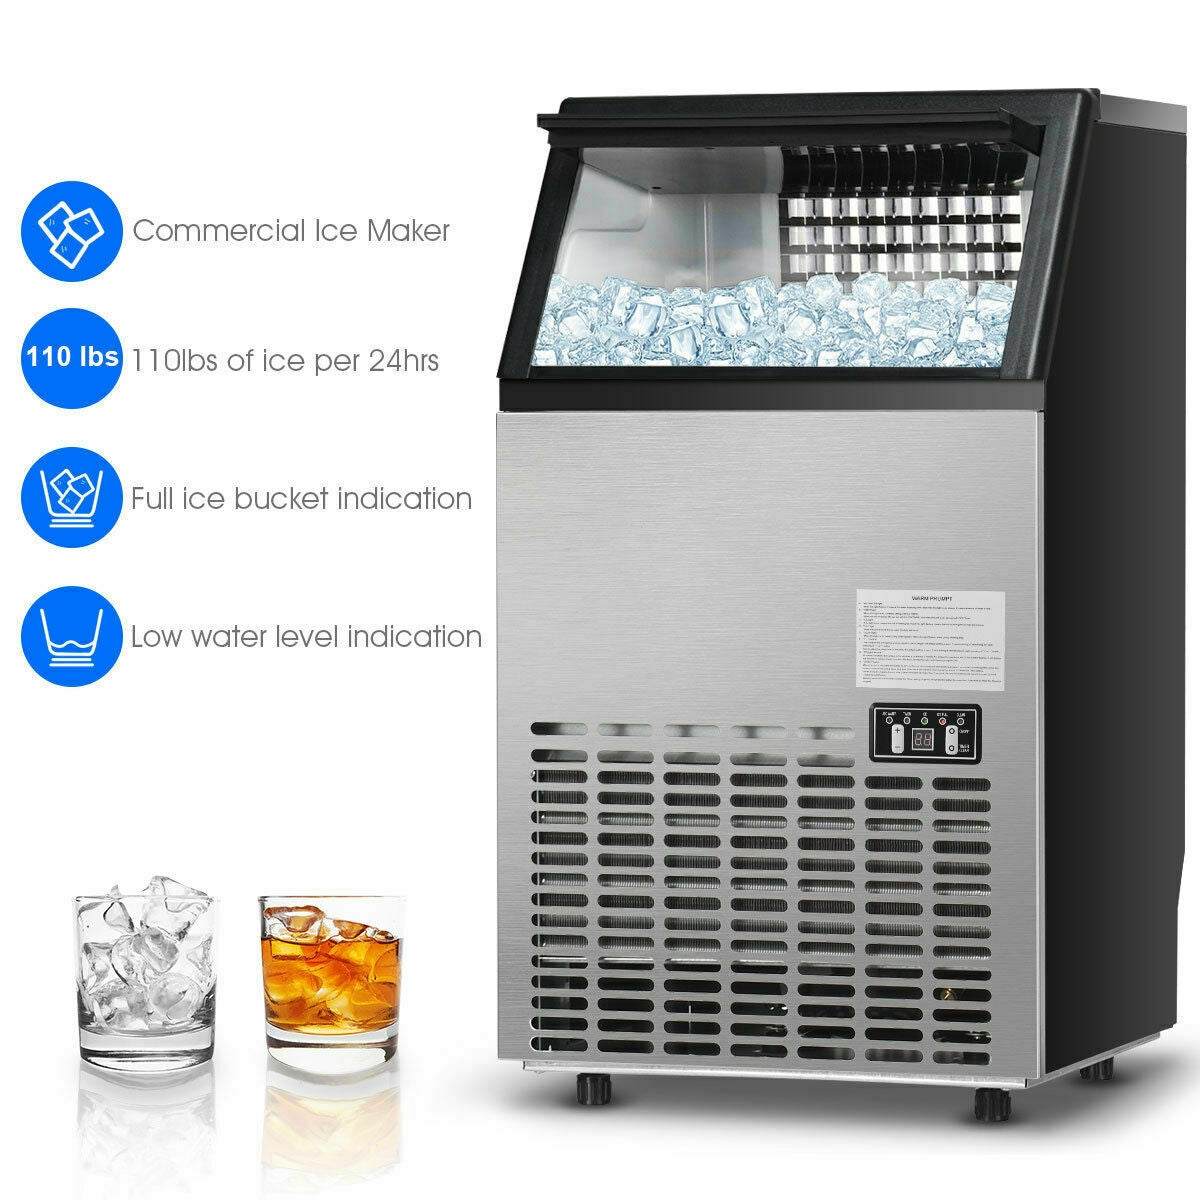 Energy Efficient: With a powerful 200W compressor for cooling, this ice maker is a valuable addition to your bar or under-counter setup. It boasts a water usage rate of up to 99%, ensuring efficient operation. (NOTE: If you don't use the ice immediately, please transfer it to the freezer.)